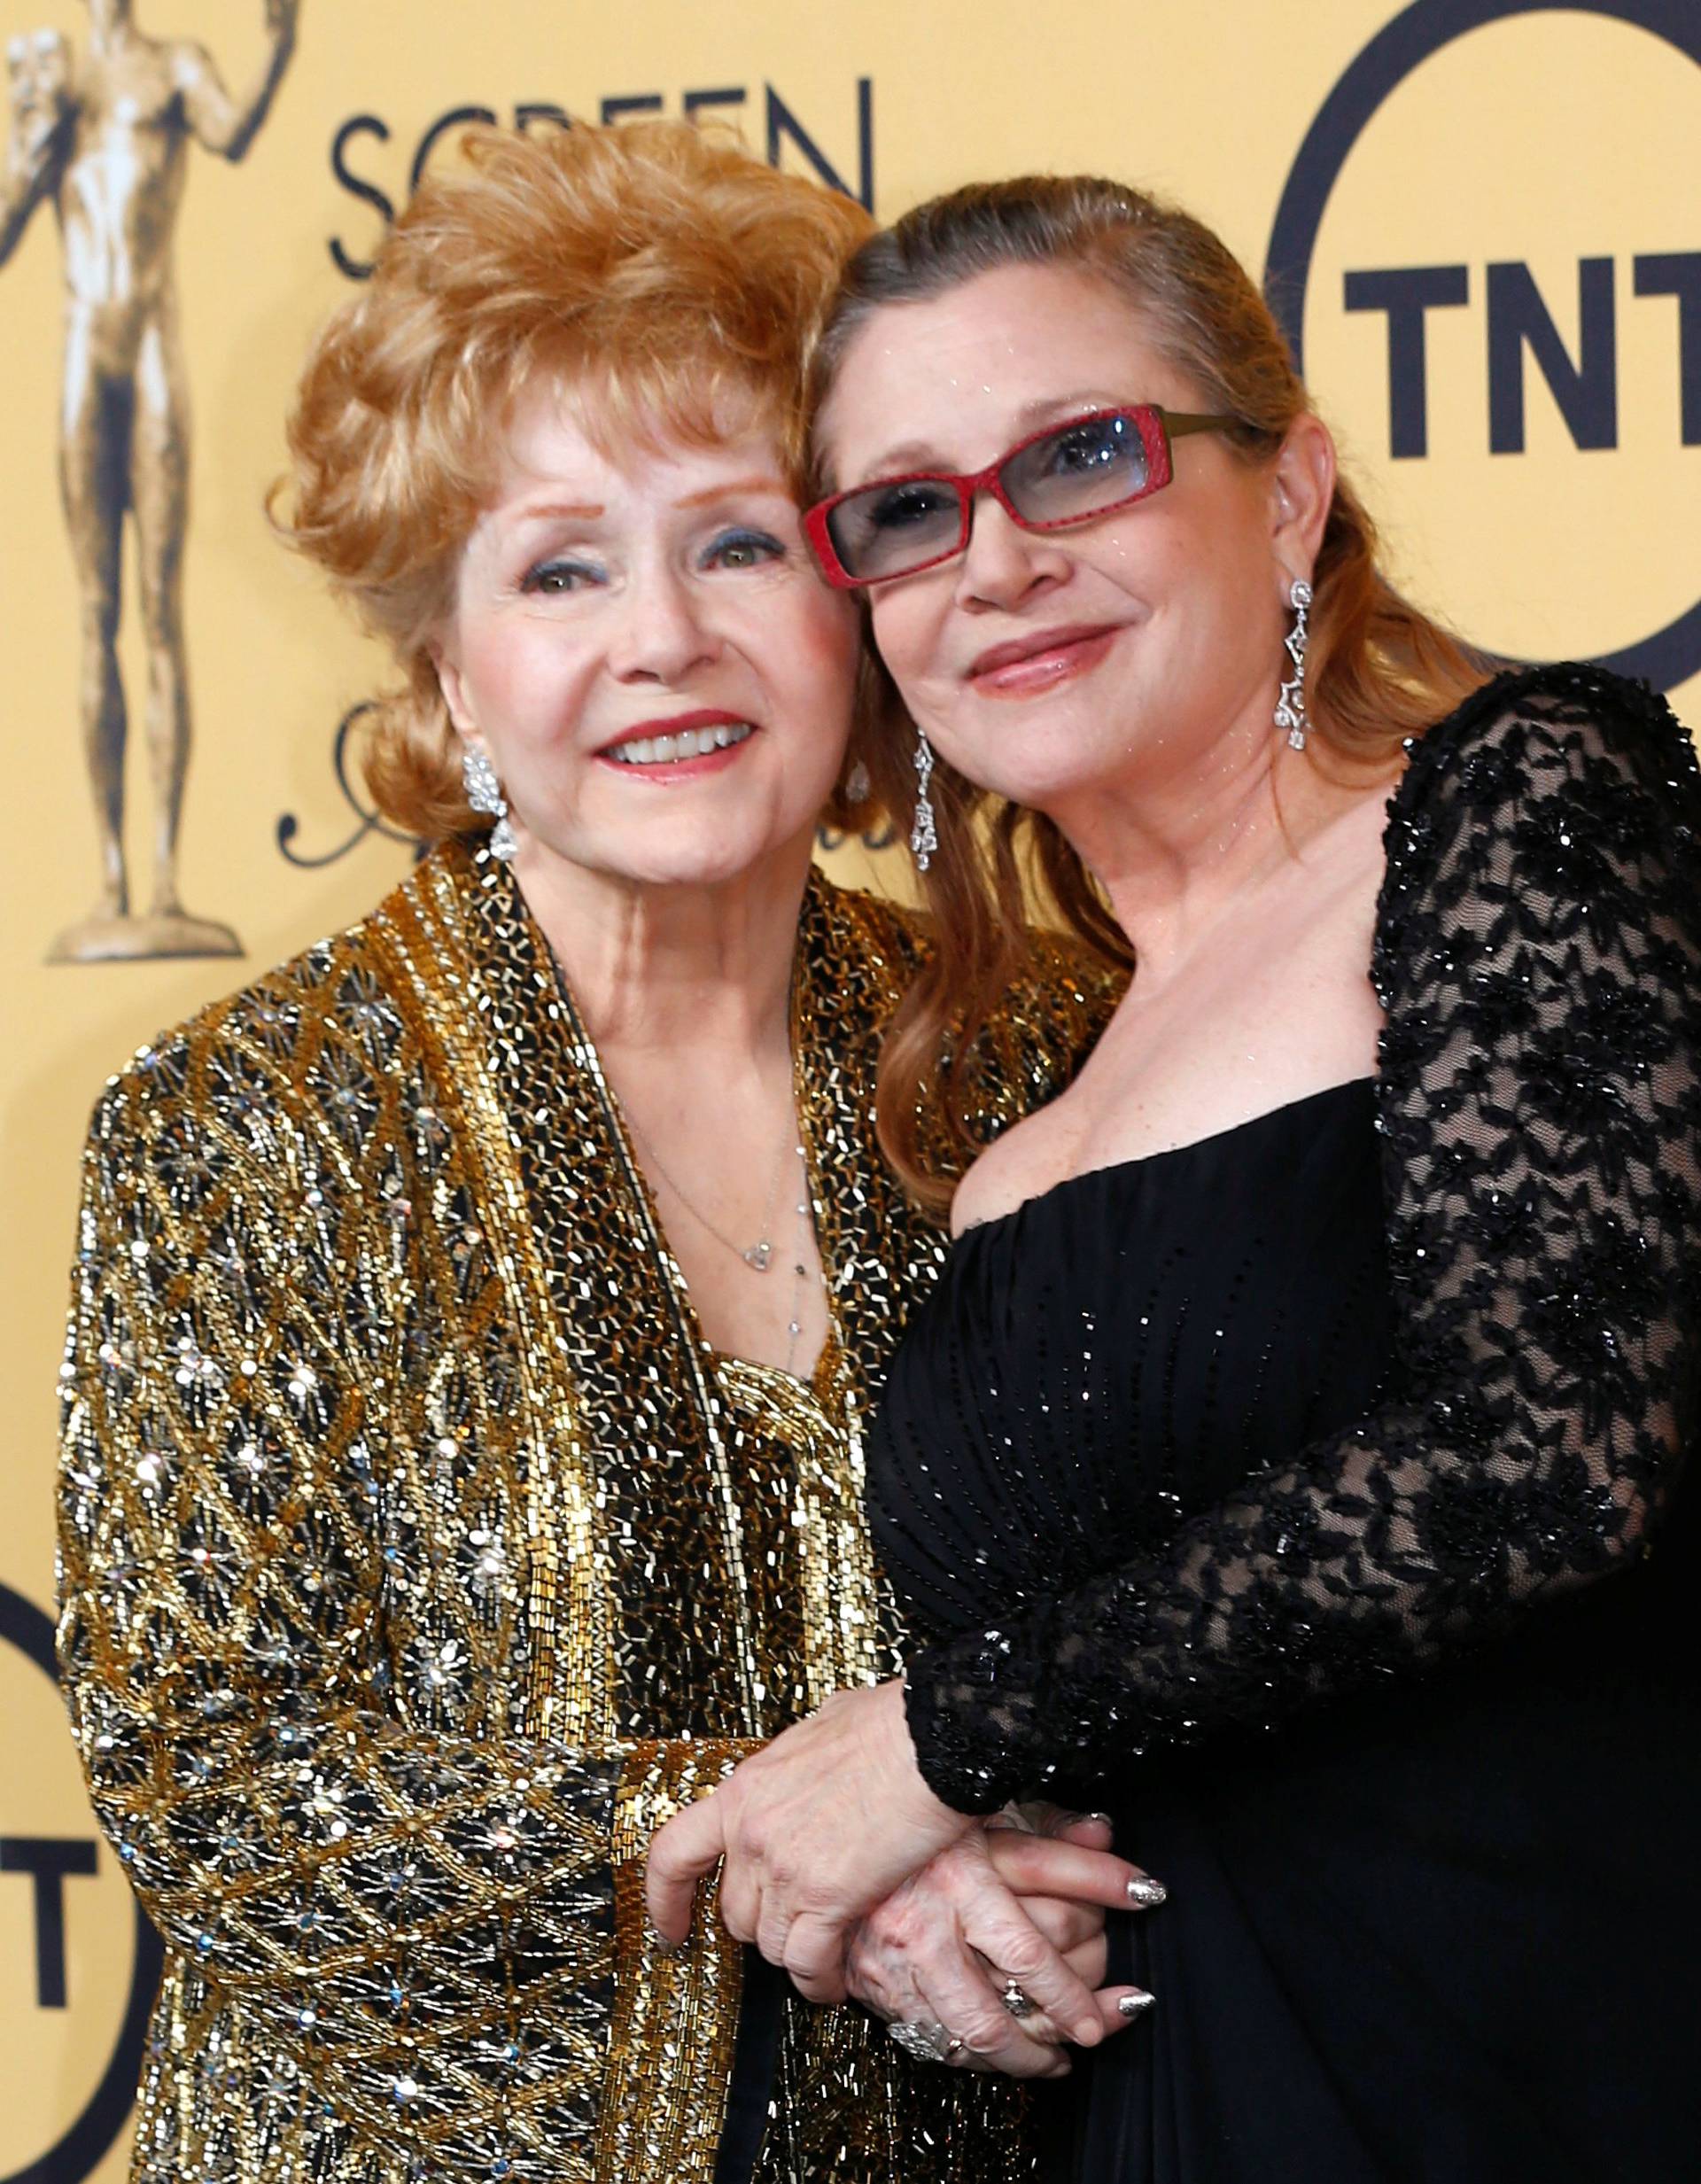 FILE PHOTO: Actress Debbie Reynolds poses with her daughter actress Carrie Fisher backstage after accepting her Lifetime Achievement award at the 21st annual Screen Actors Guild Awards in Los Angeles